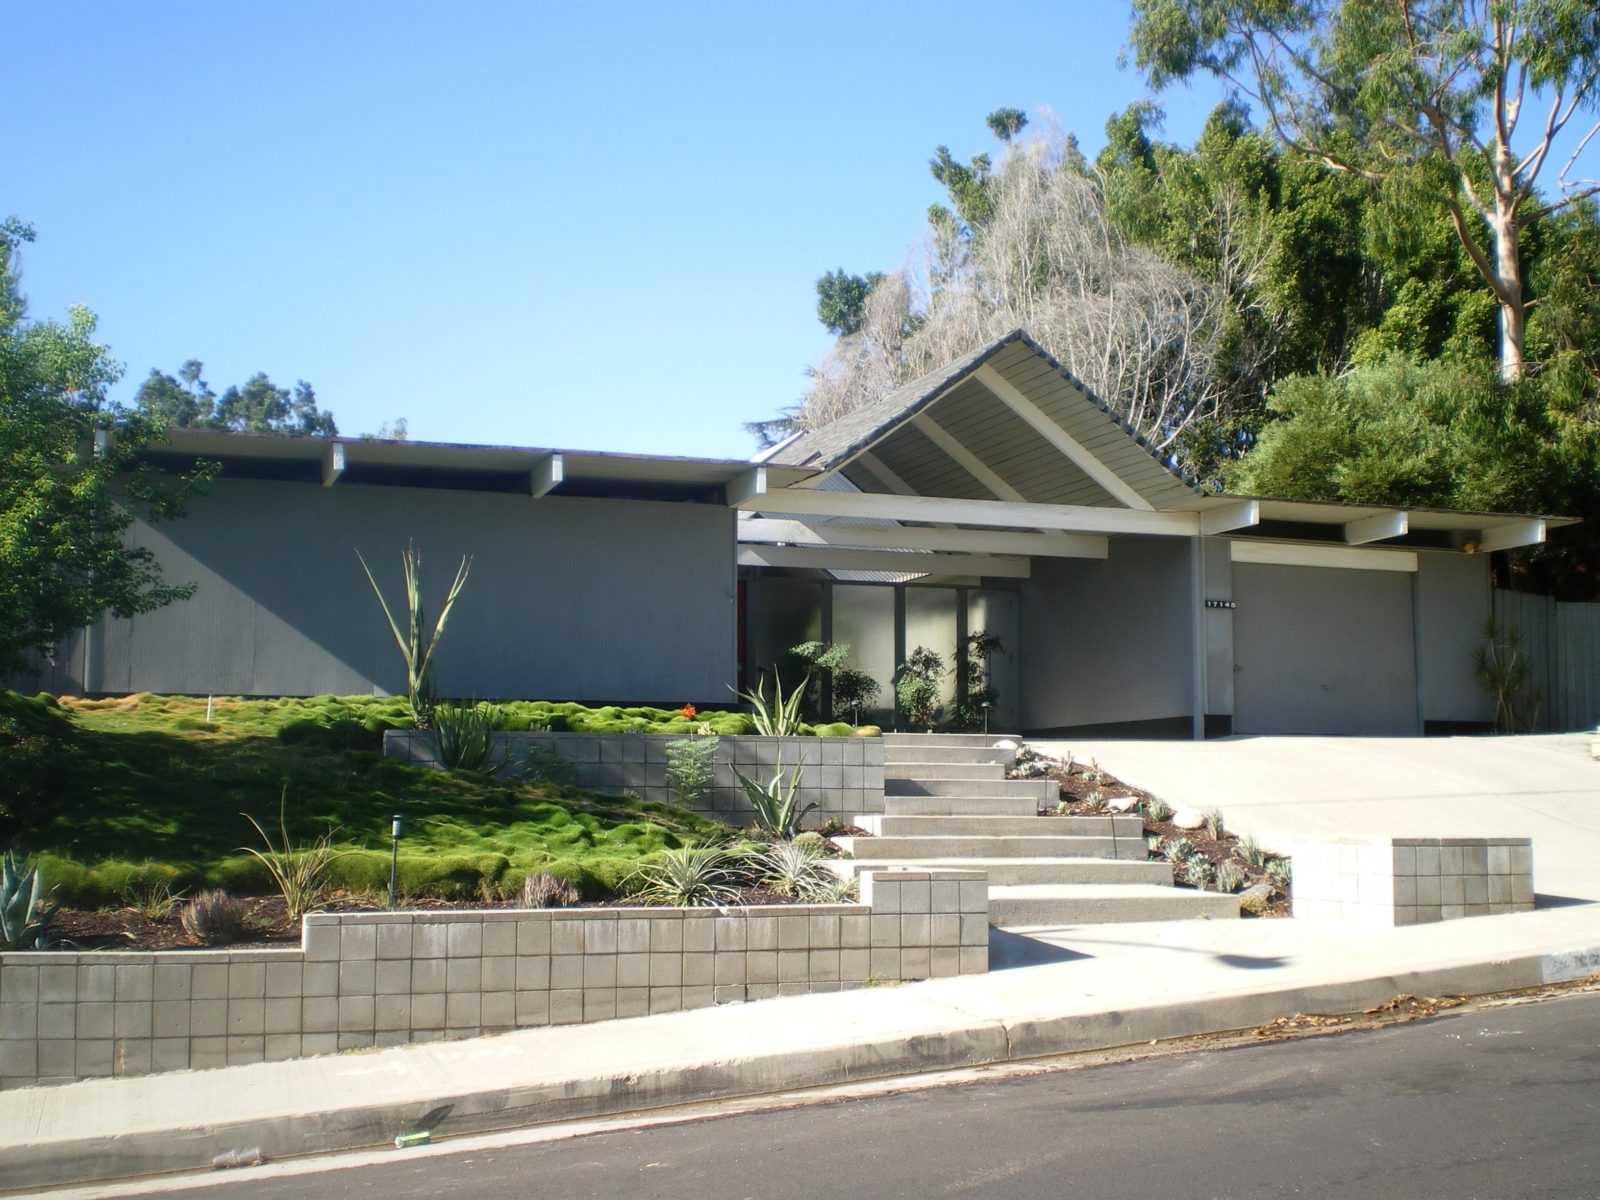 Eichler Homes: A New Way of Living for the Future